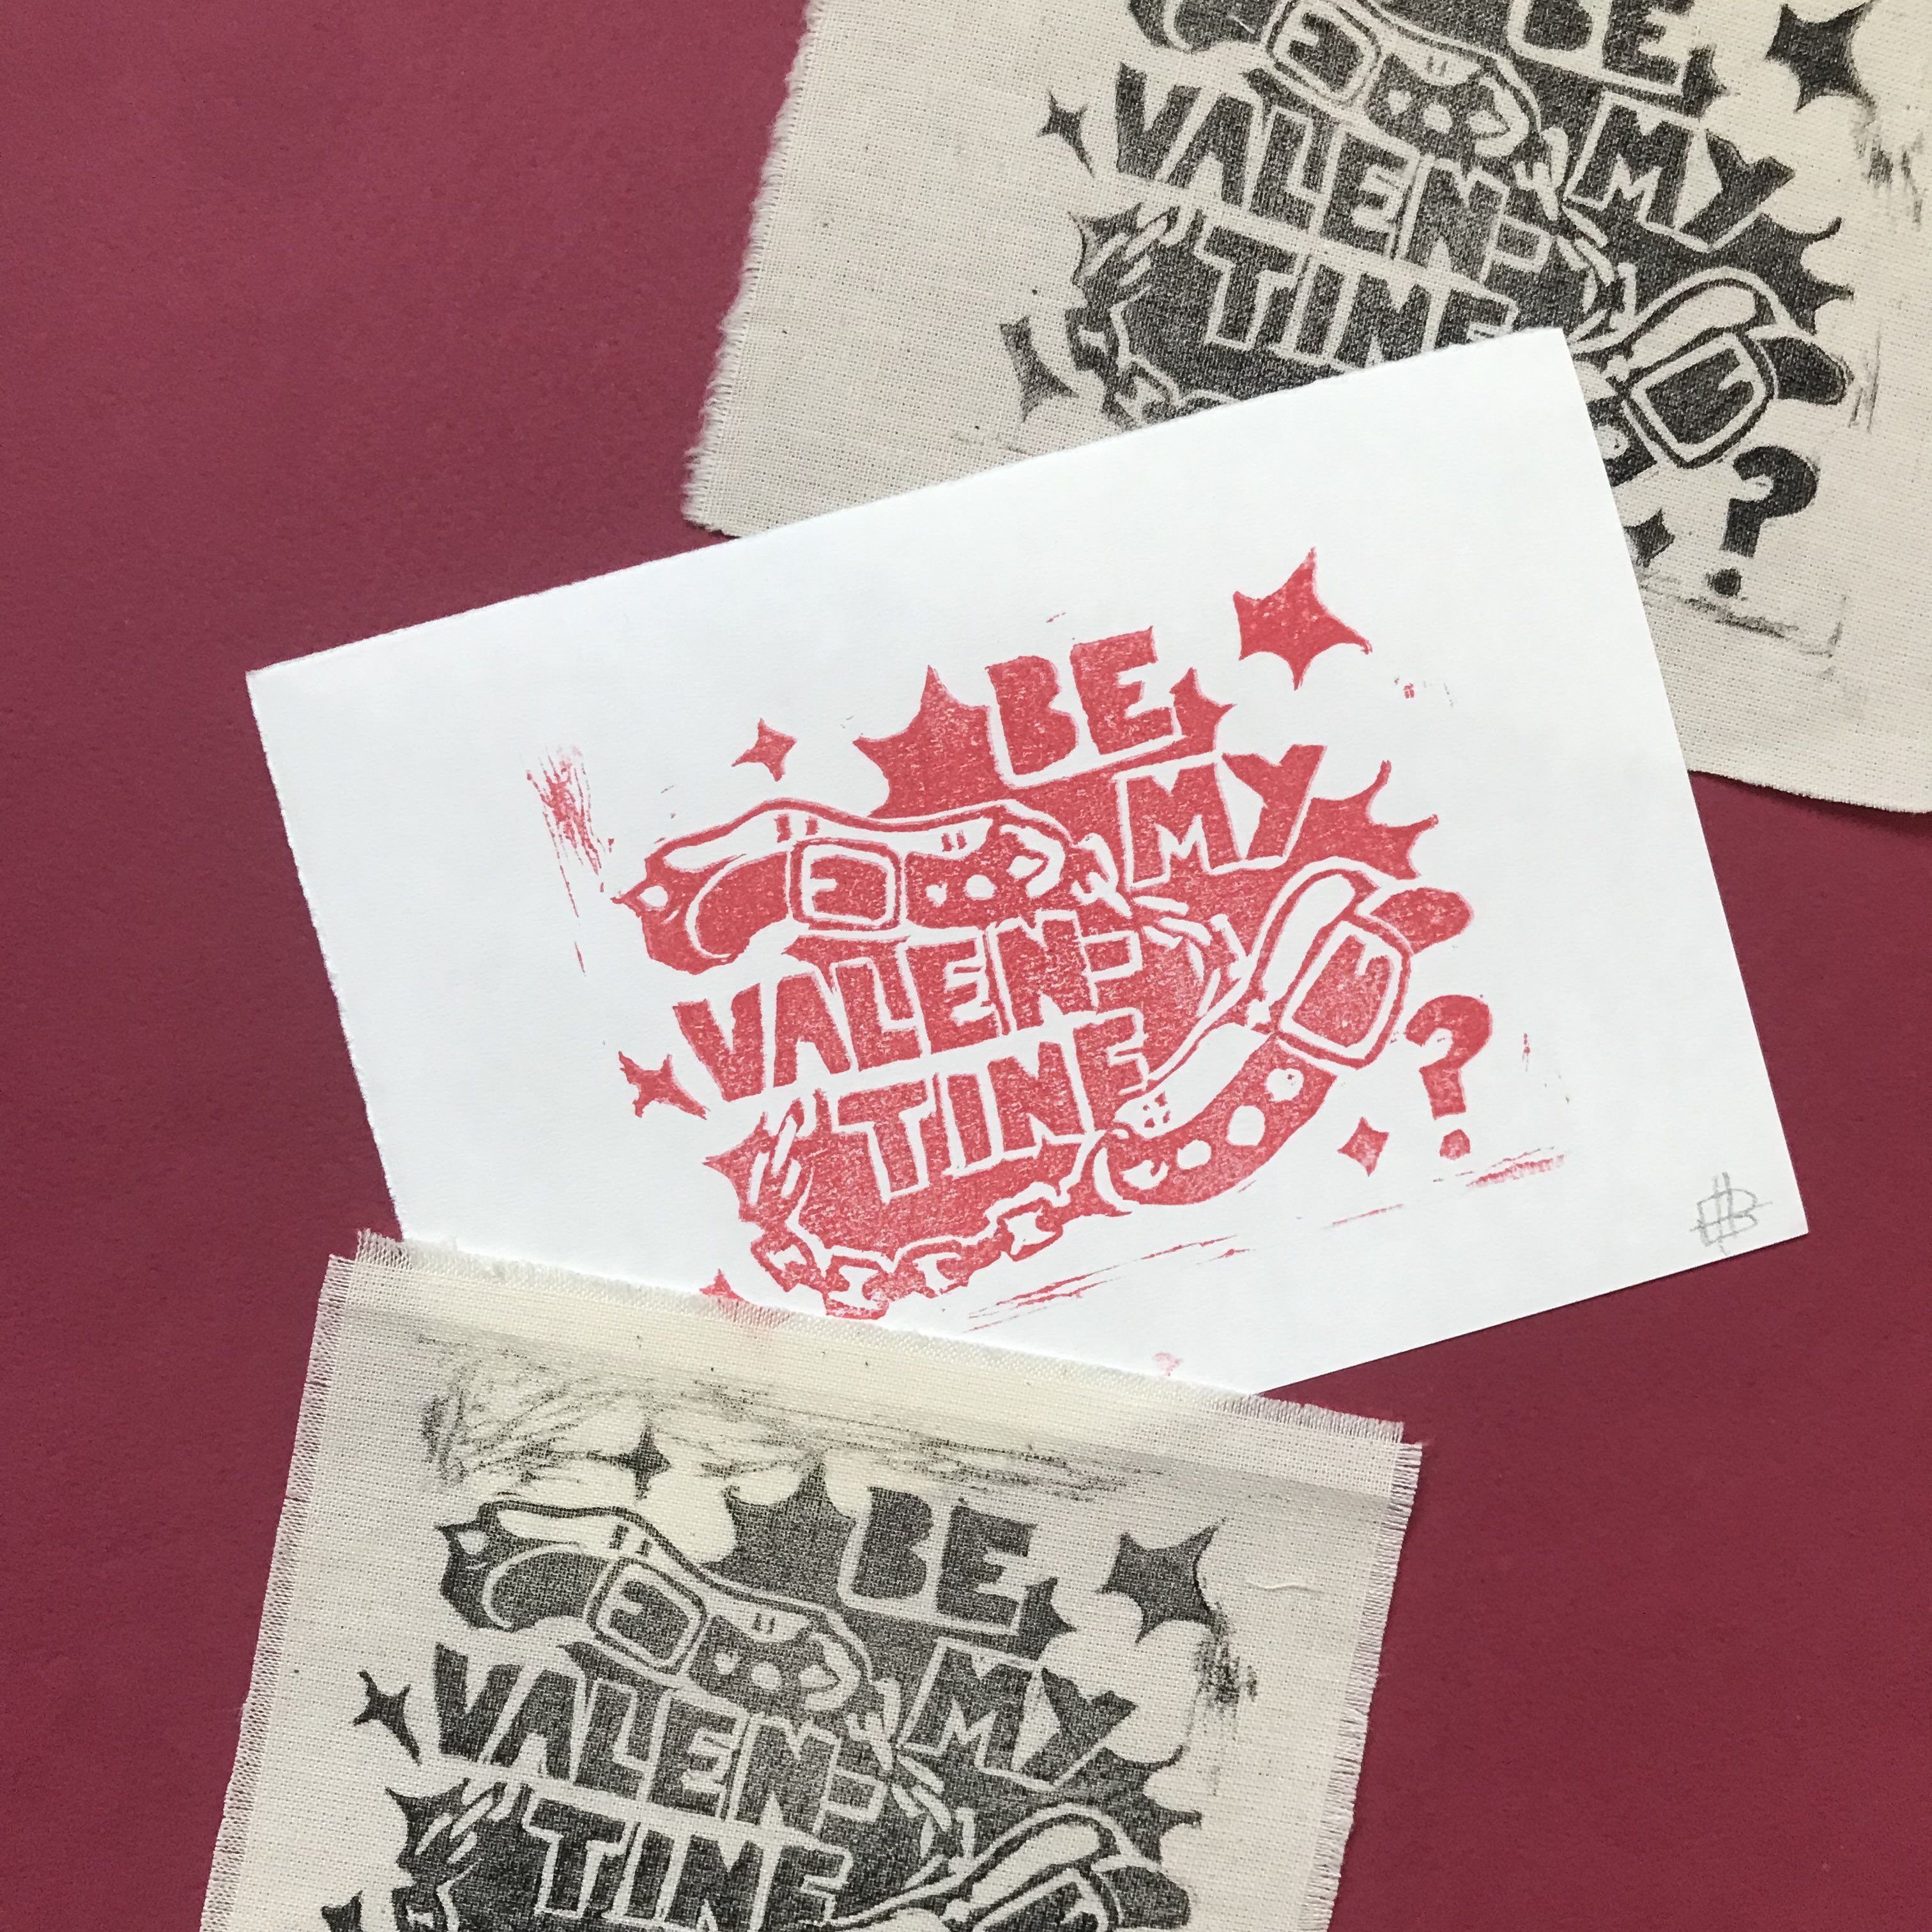 A product photo of a scattered pile of linoprints in black, and at the top, the same design on red against white paper. The design is of two spiked collars tied together, with text in front of them reading 'BE MY VALENTINE.'